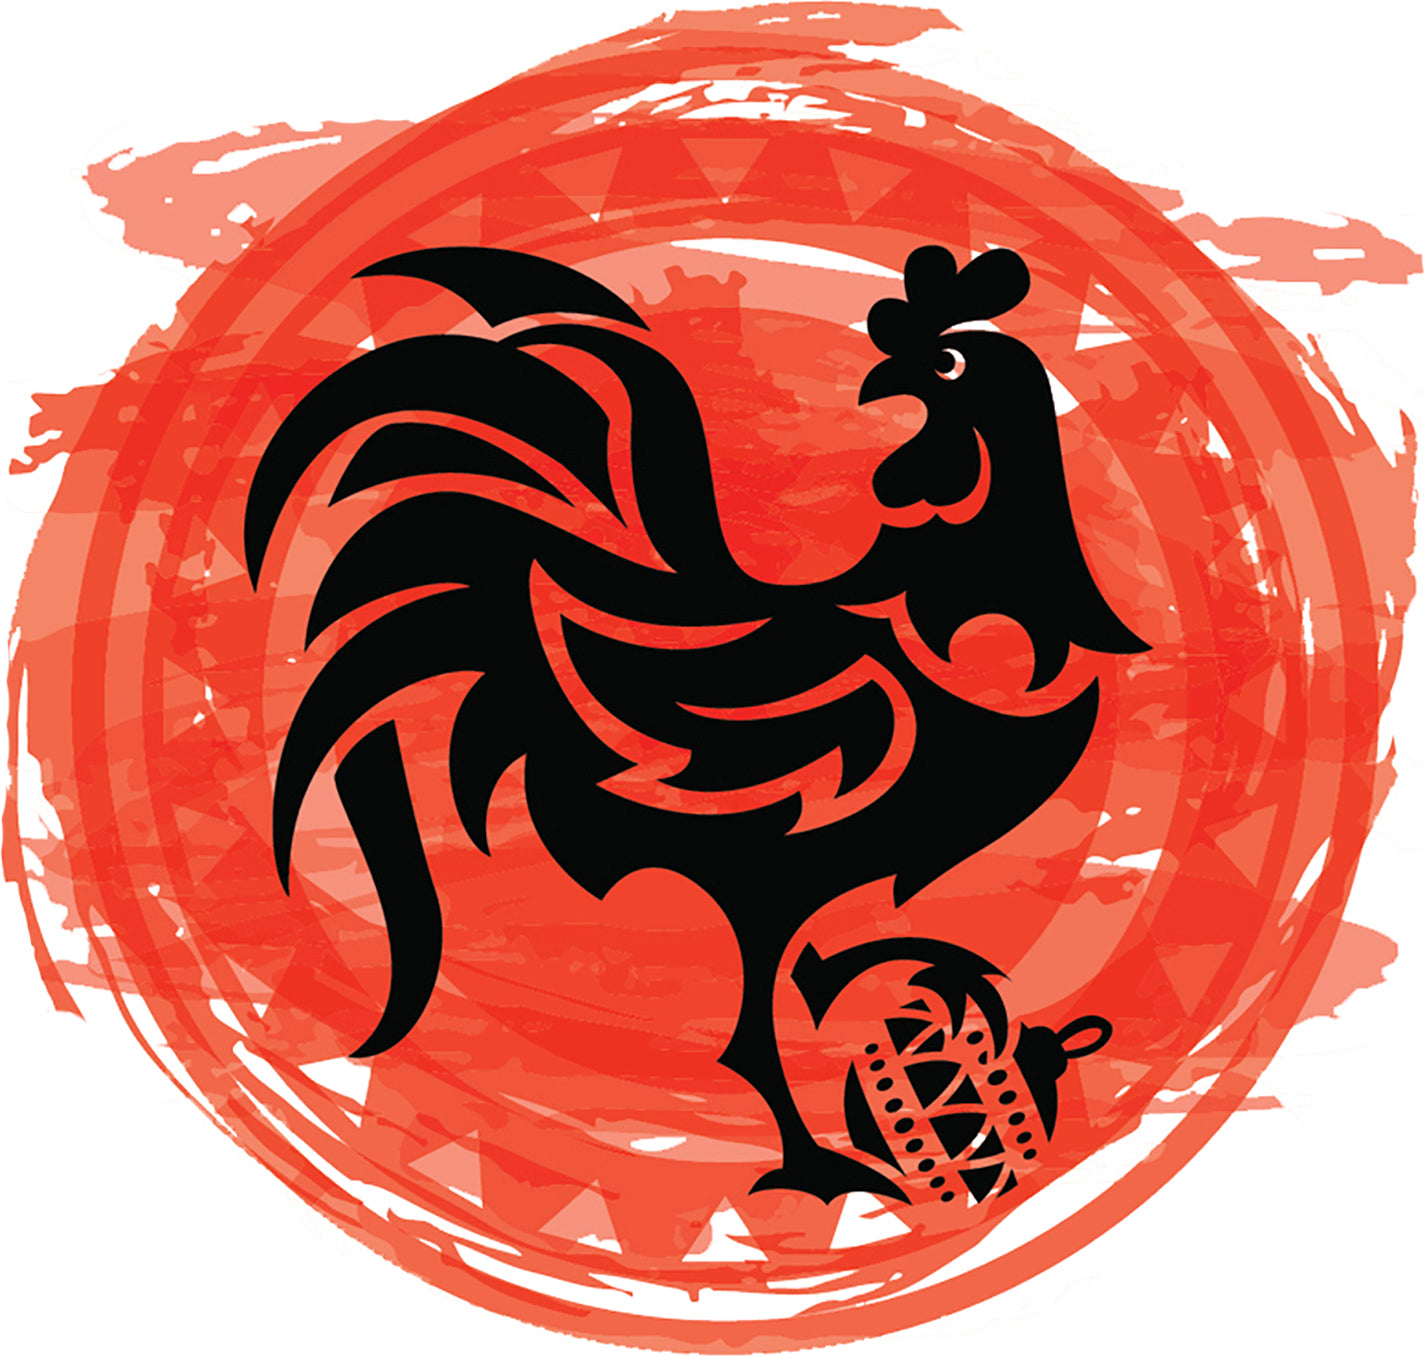 Cool Orange 2017 Year of the Rooster Asian Zodiac Cartoon Icon #4 Vinyl Sticker